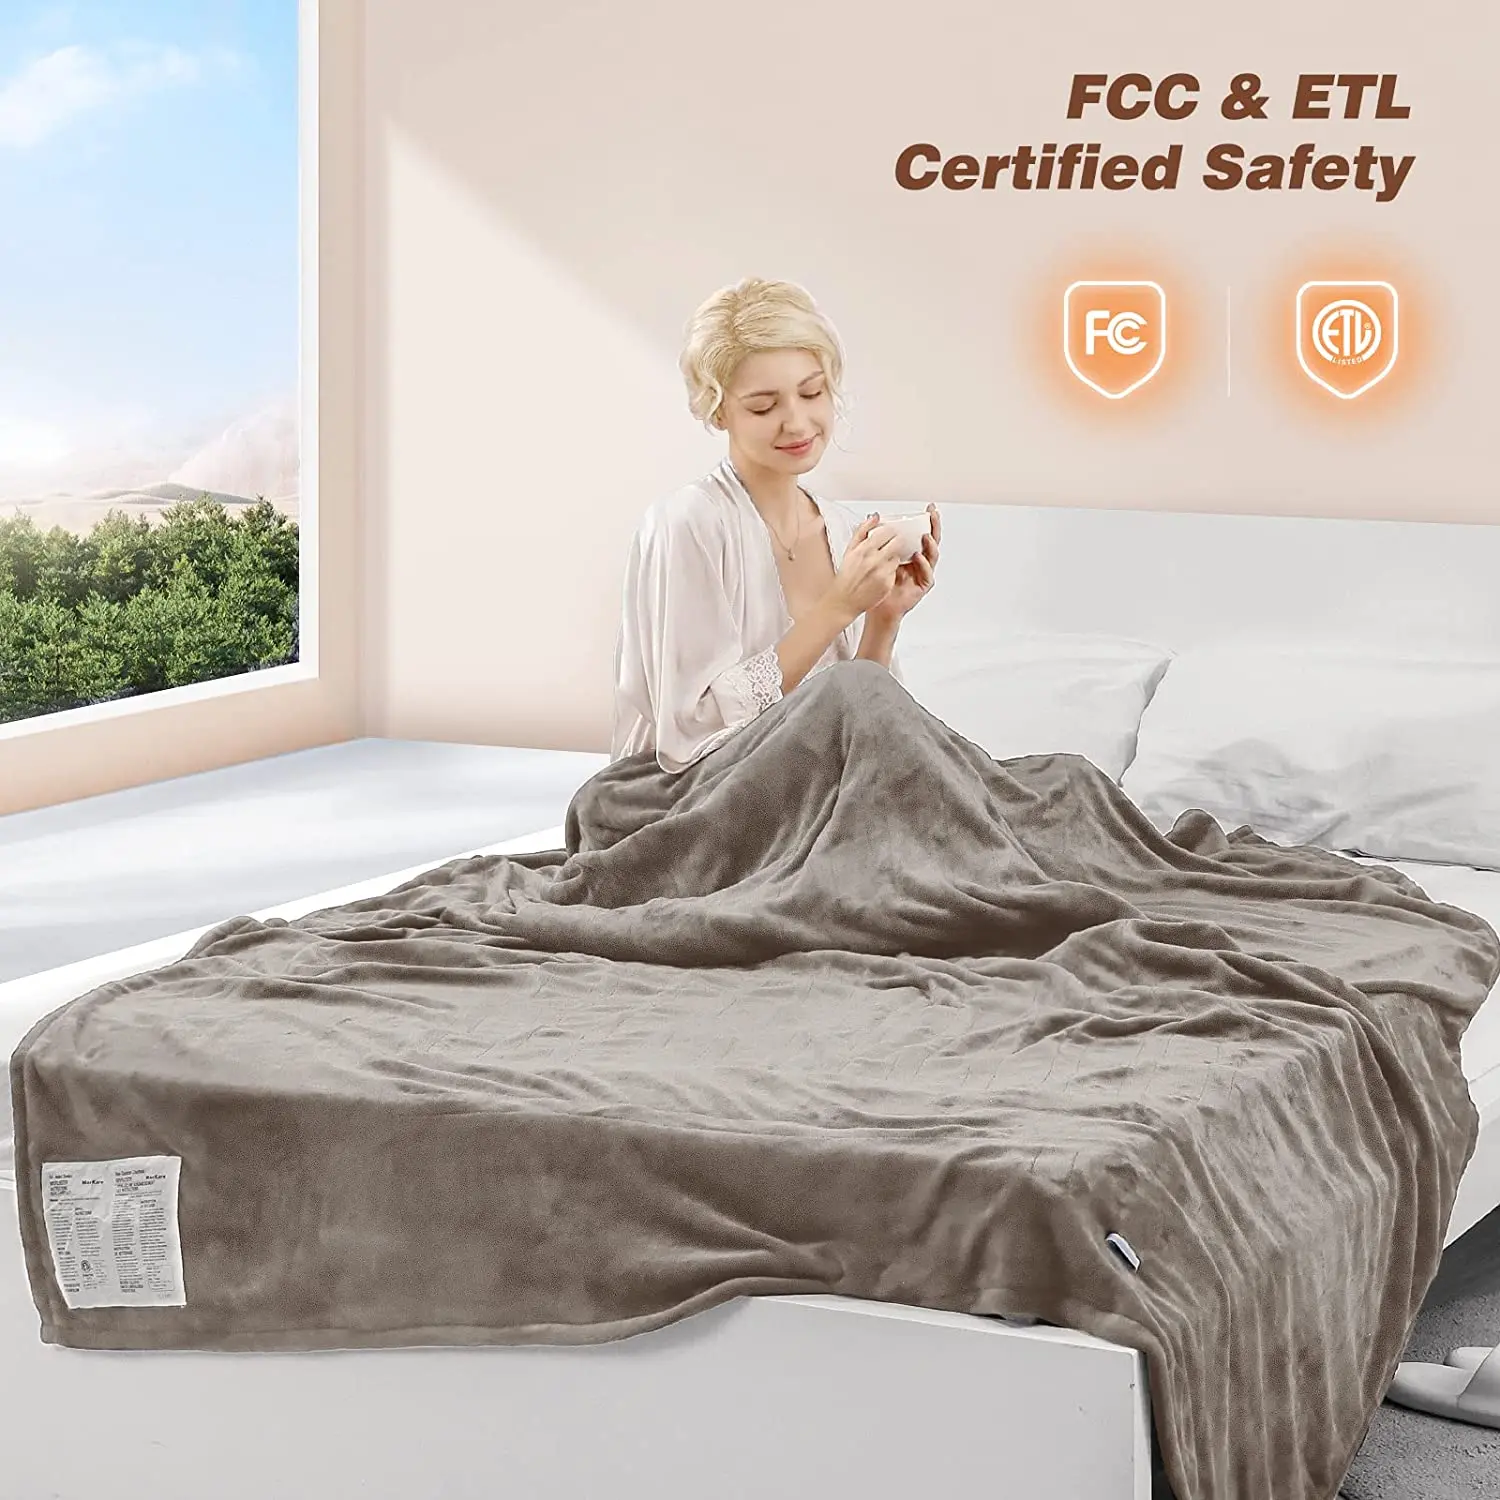 

72"x 84" Electric Blanket, Full Size Flannel Heated Blanket with 4 Heating Levels and 10 Hours Auto-off, ETL Certification, Fast